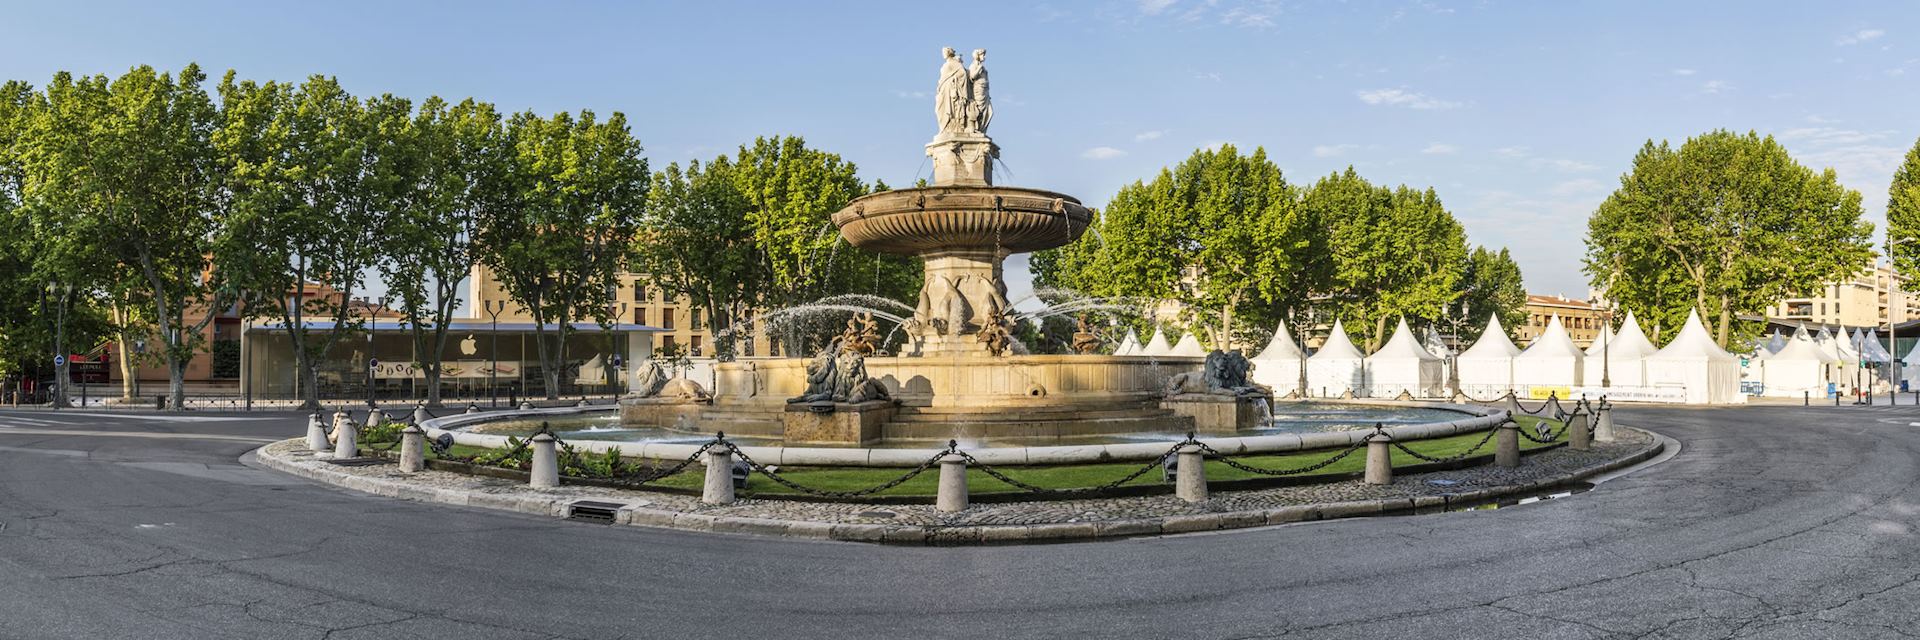 Visit Aix En Provence On A Trip To France Audley Travel